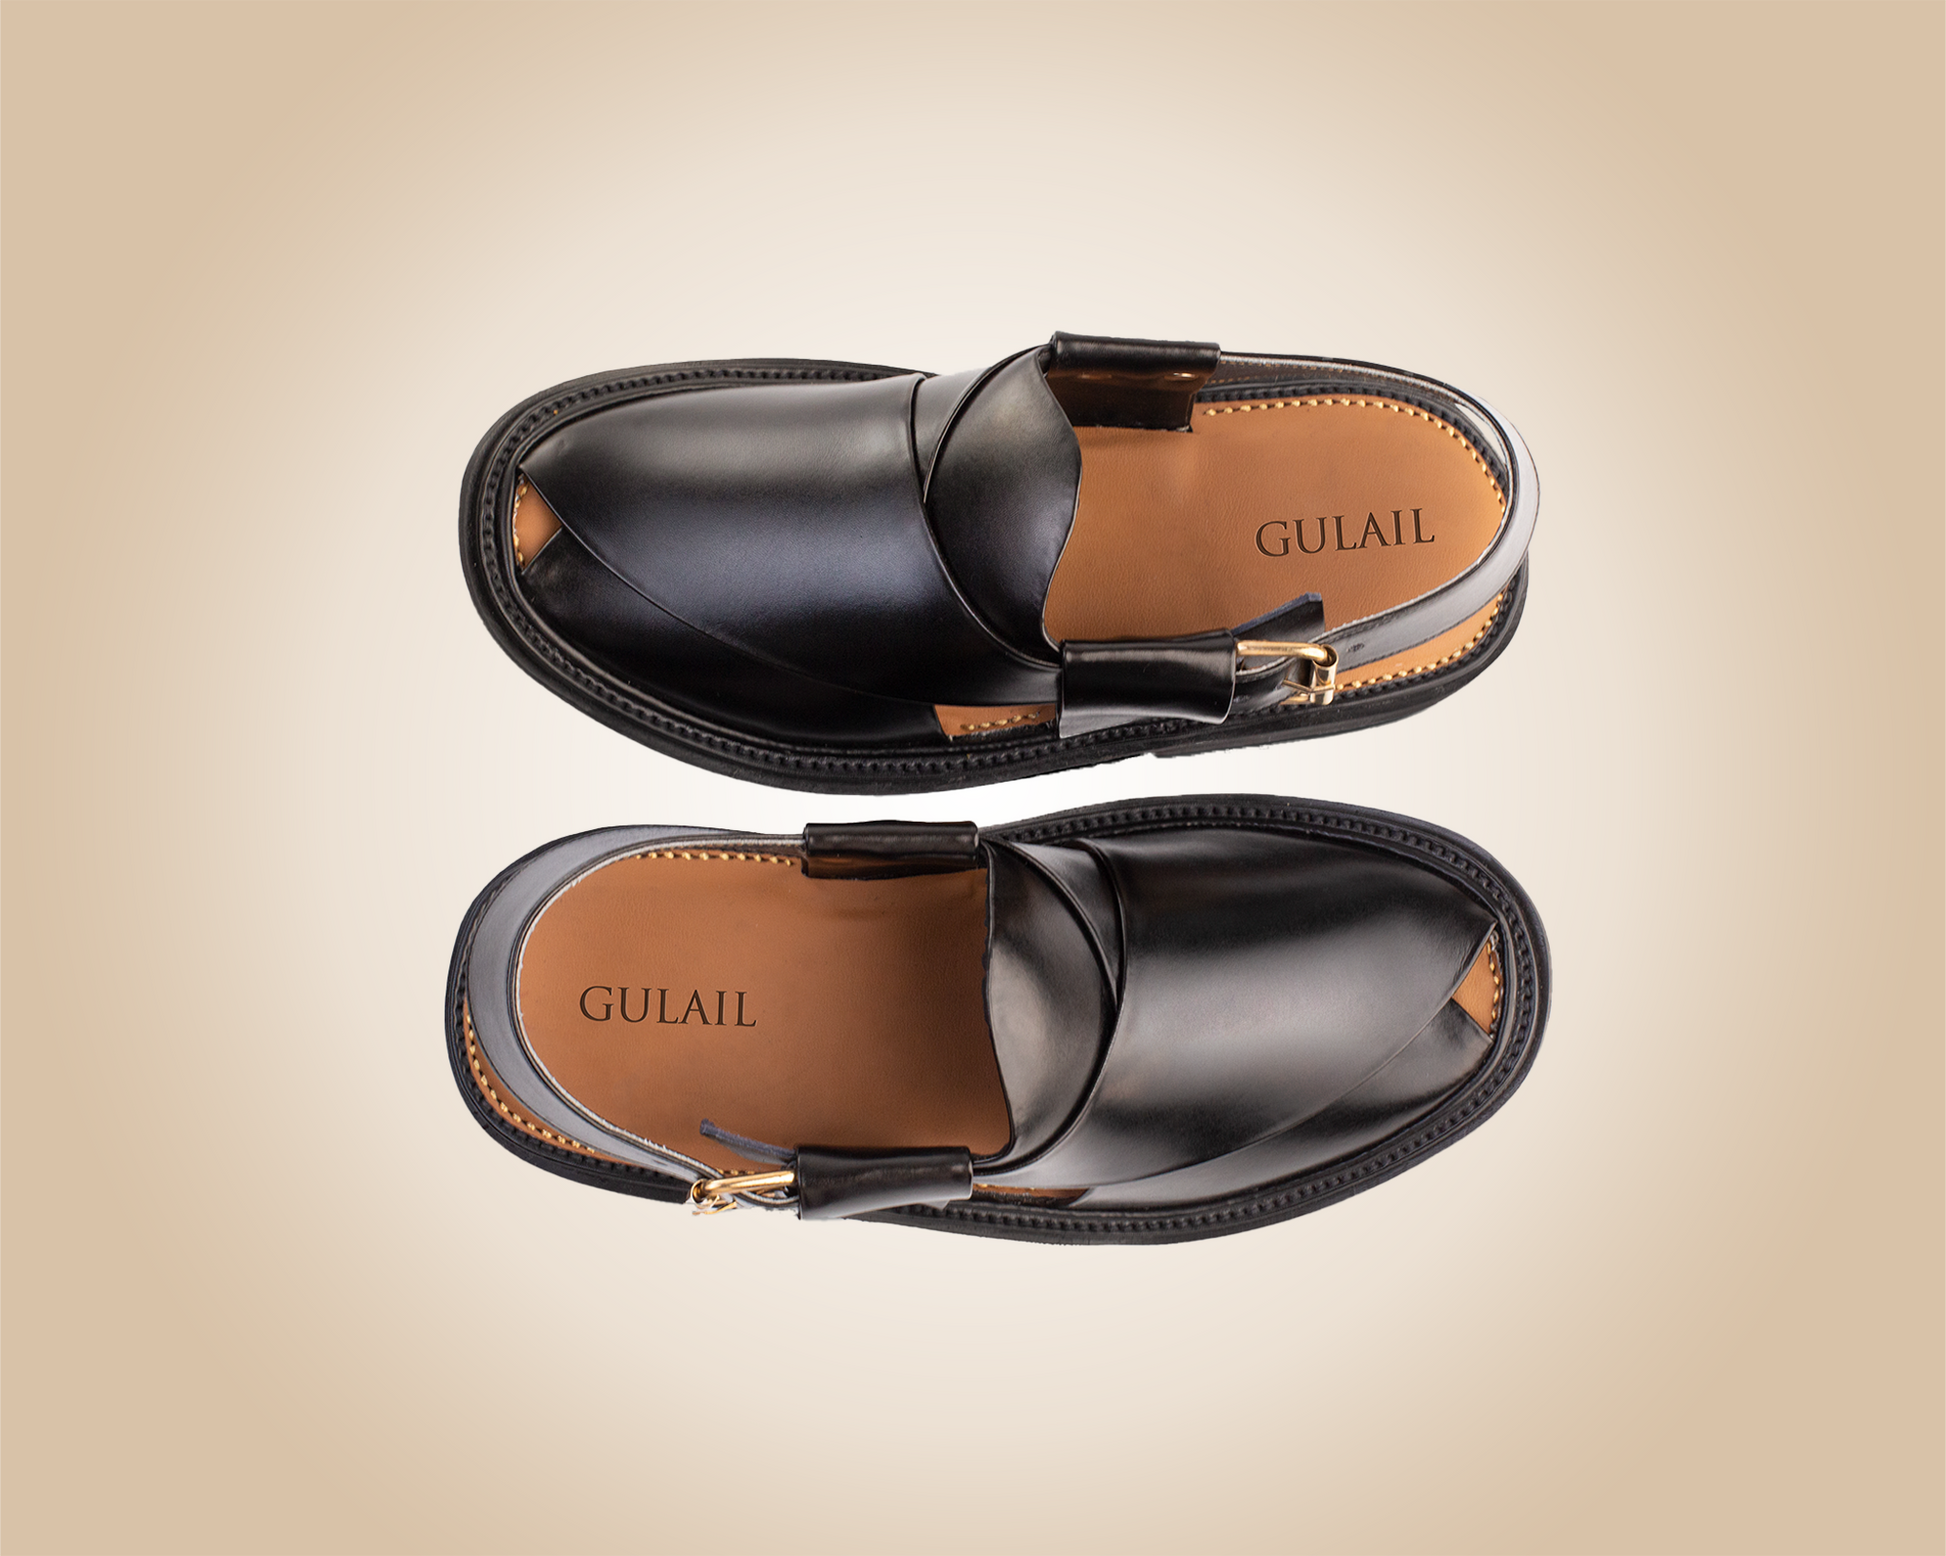 Round Shape Jet Black Saply sandals, known as Peshawari Chappal, featuring traditional leather craftsmanship.